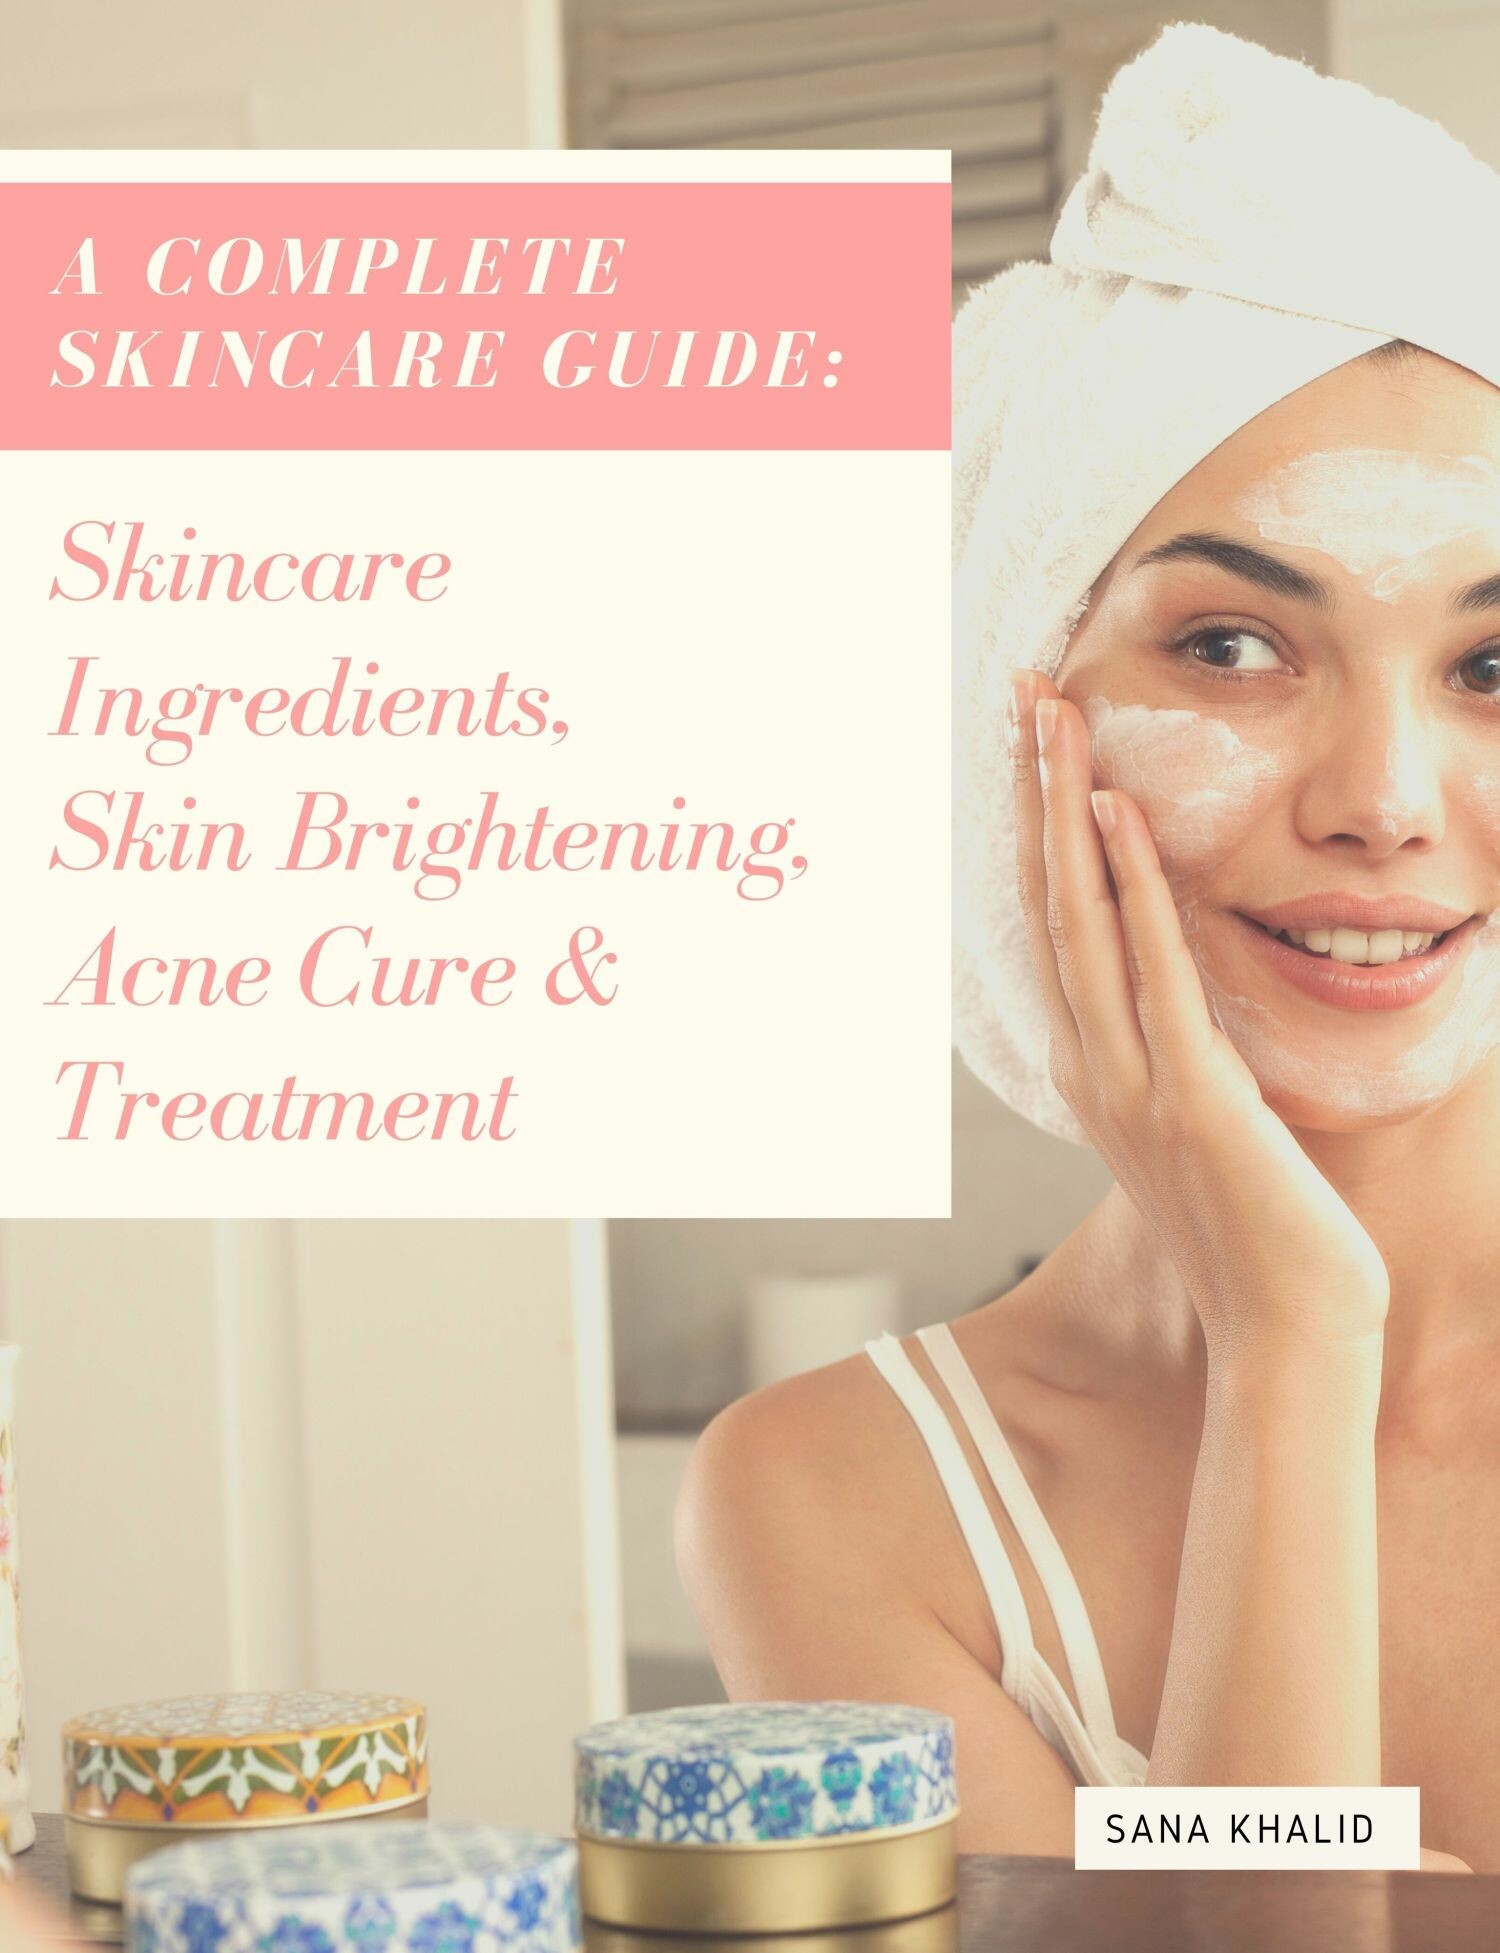 A Complete Skincare Guide: Skincare Ingredients, Skin Brightening, Acne Cure & Treatment